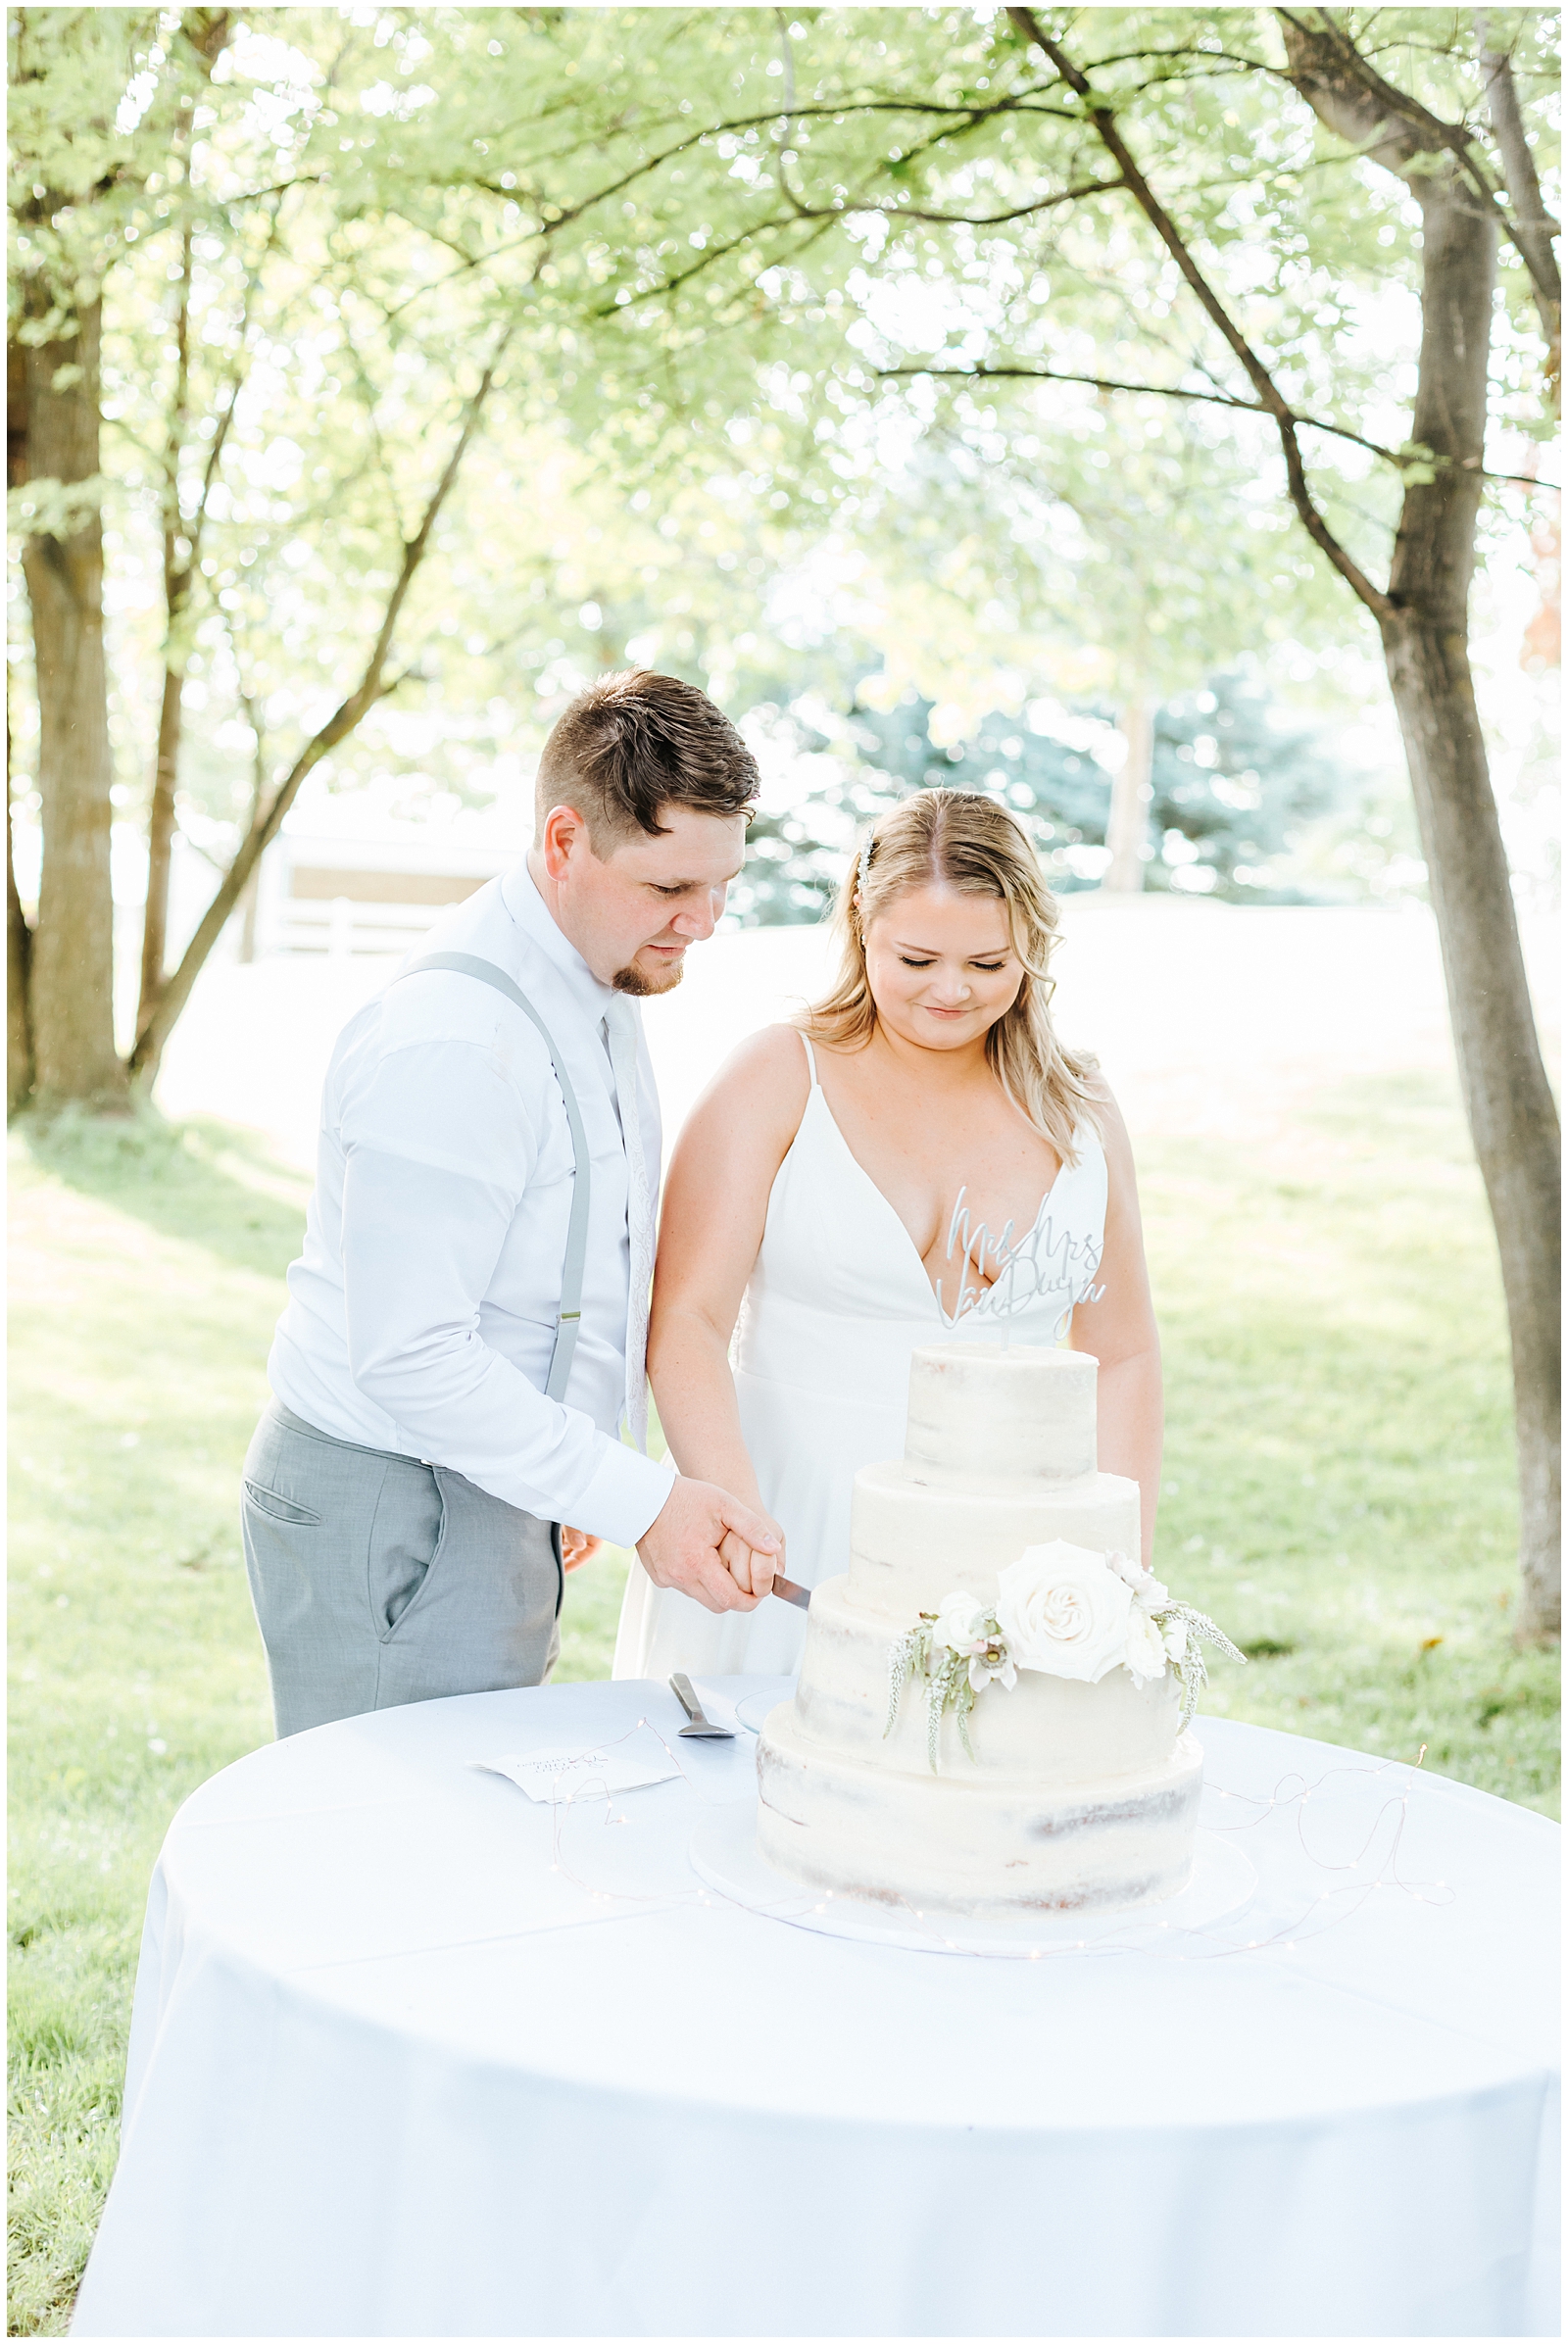 Bride and Groom cutting their cake - tiered white naked wedding cake with simple flowers